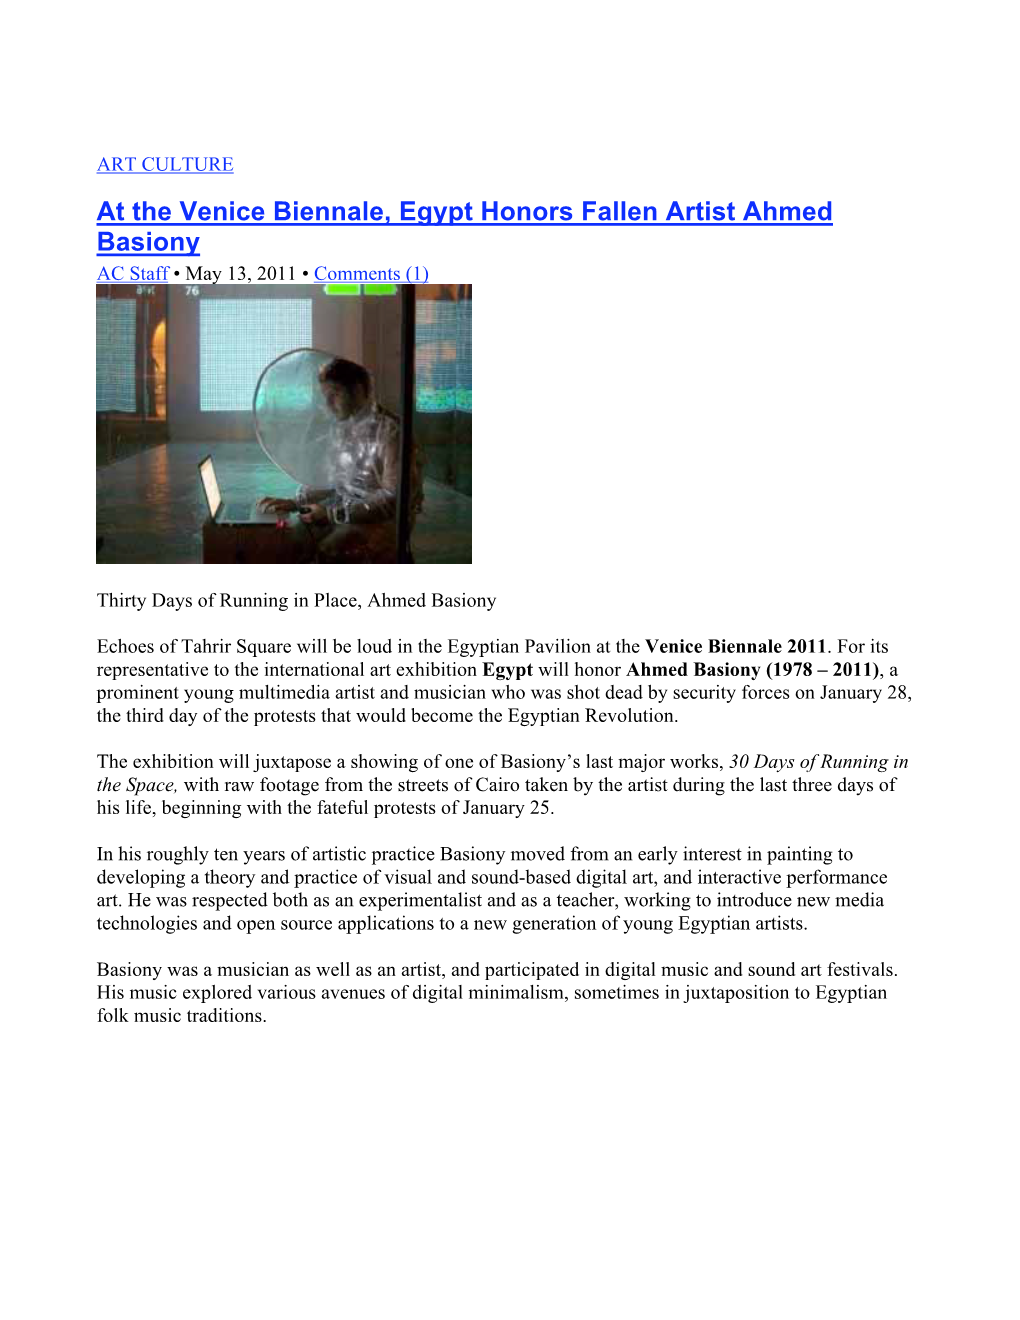 At the Venice Biennale, Egypt Honors Fallen Artist Ahmed Basiony AC Staff • May 13, 2011 • Comments (1)